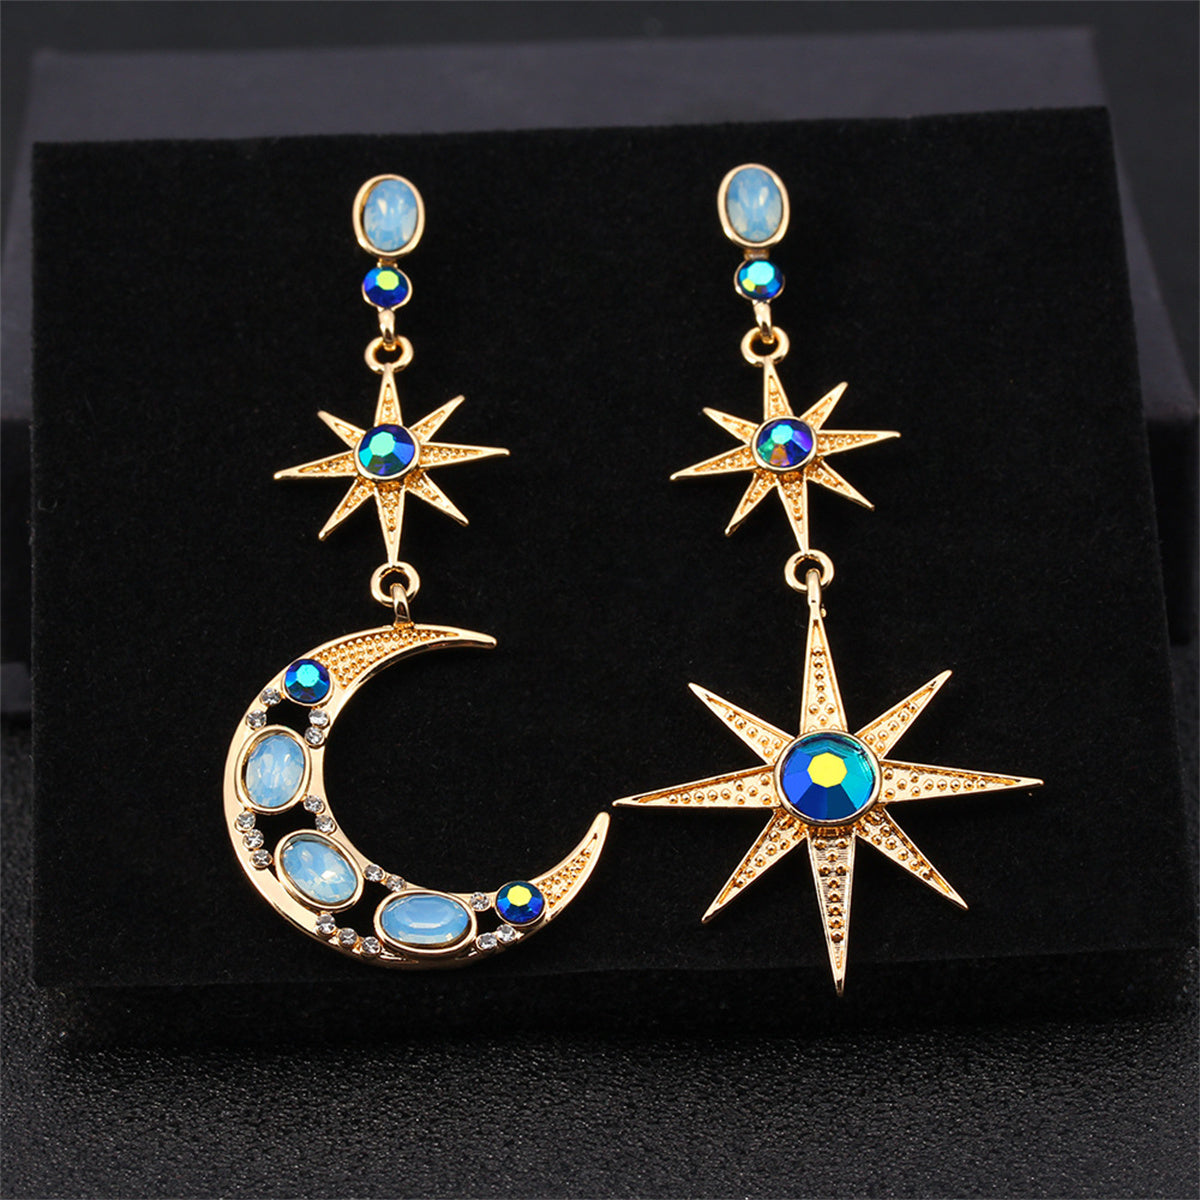 Celestial Moon & Star Drop Earrings Gold Moon Star with crystal and blue tonal colored stone Earrings for Women